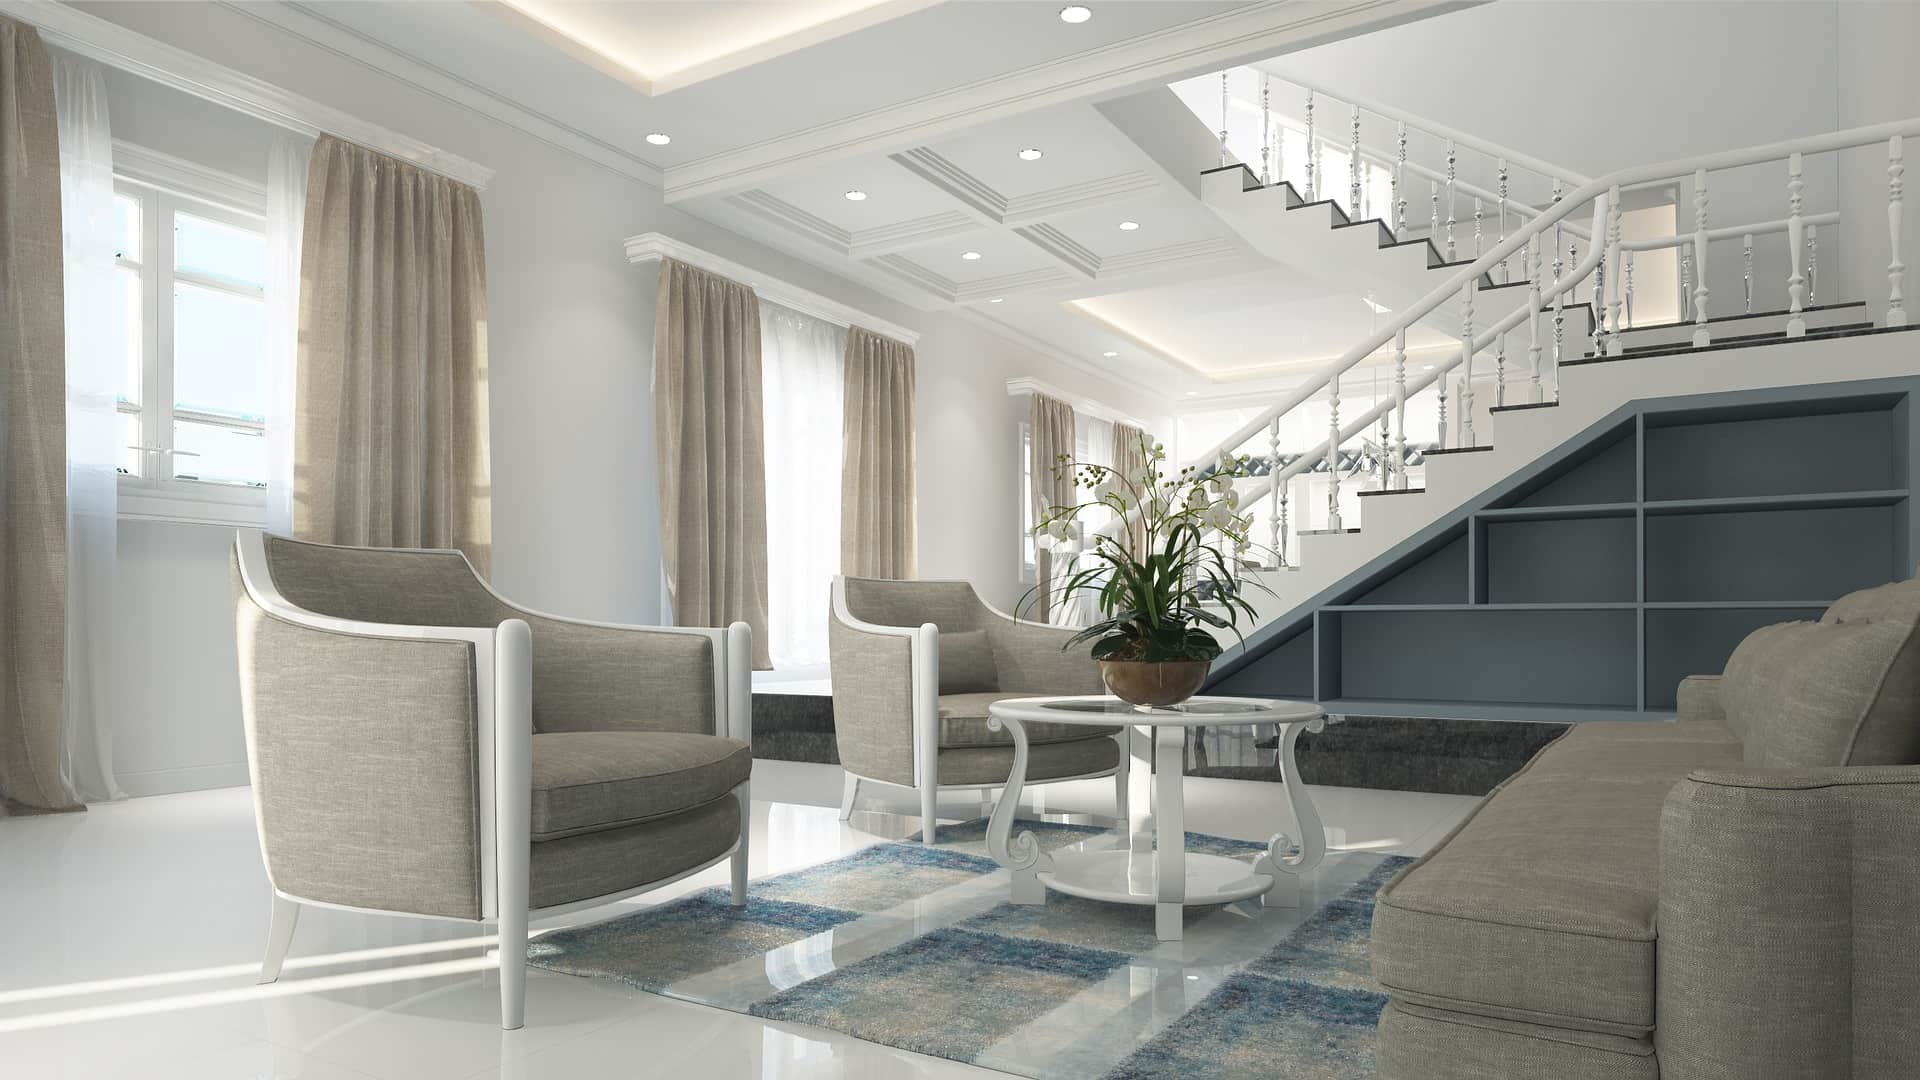 Expert Tips to Make Your Home More Accessible. Large private mansion with minimalistic open plan styled in white with slight gray and blue